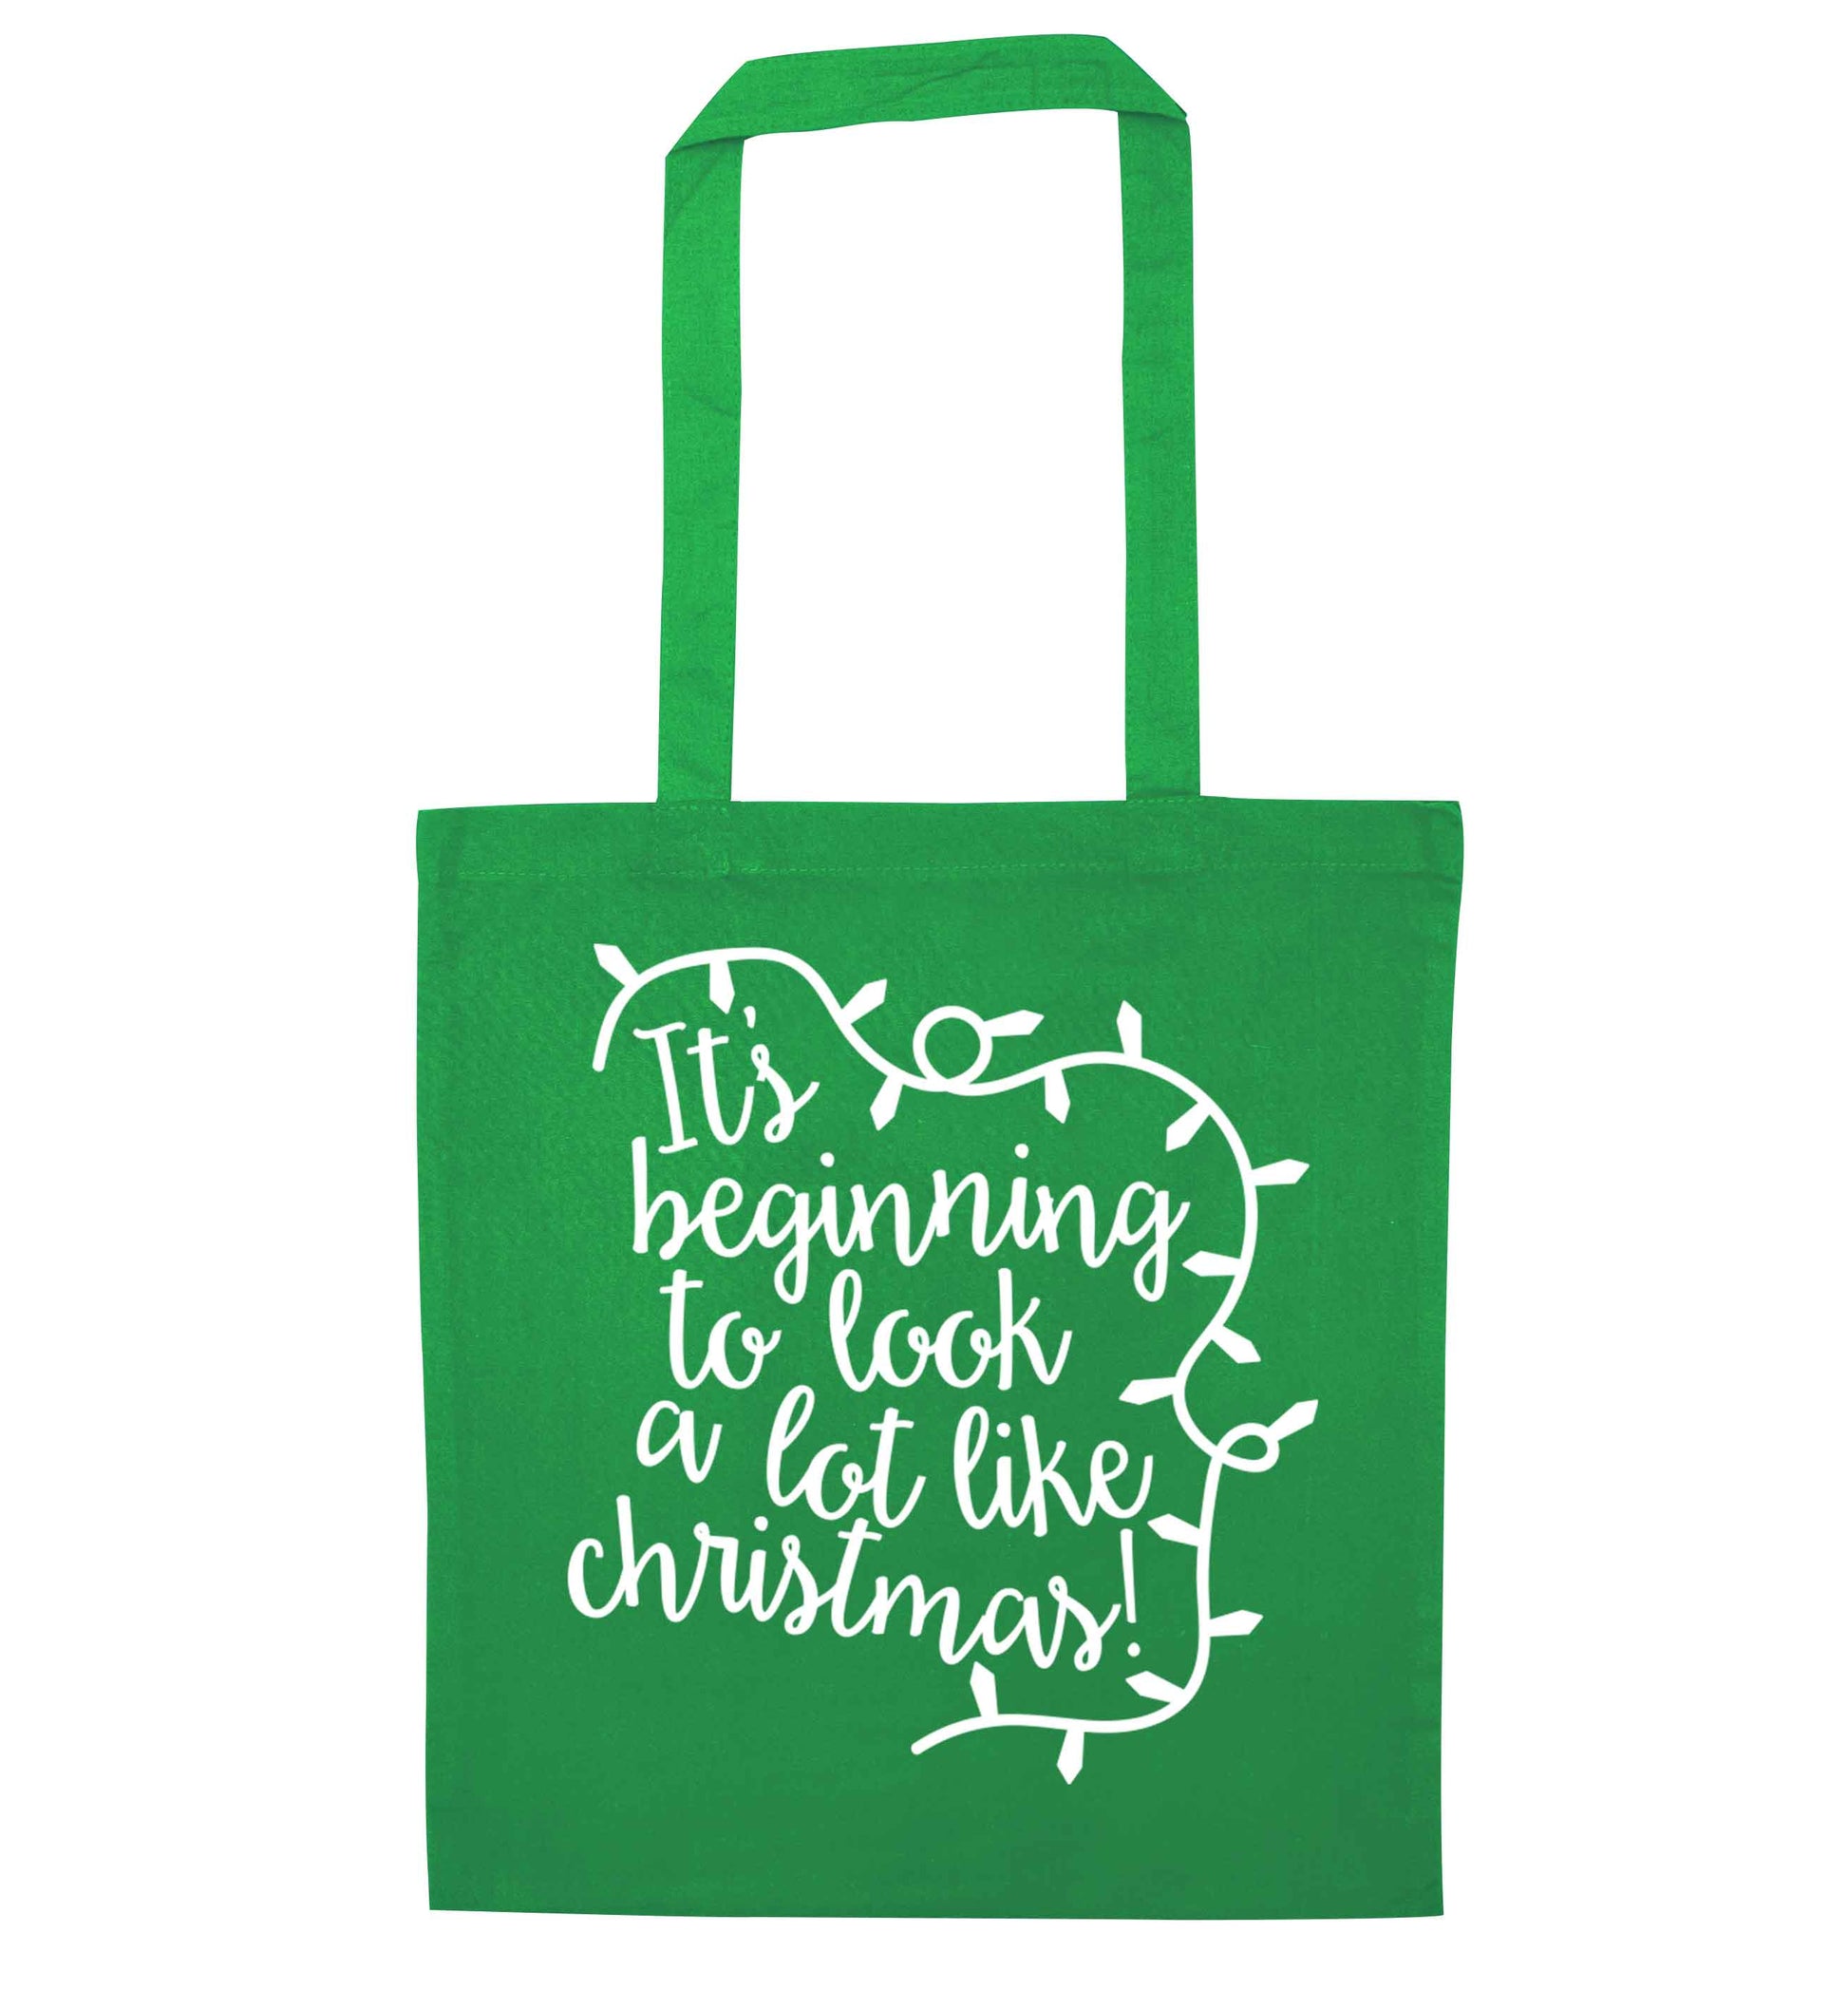 It's beginning to look a lot like Christmas green tote bag